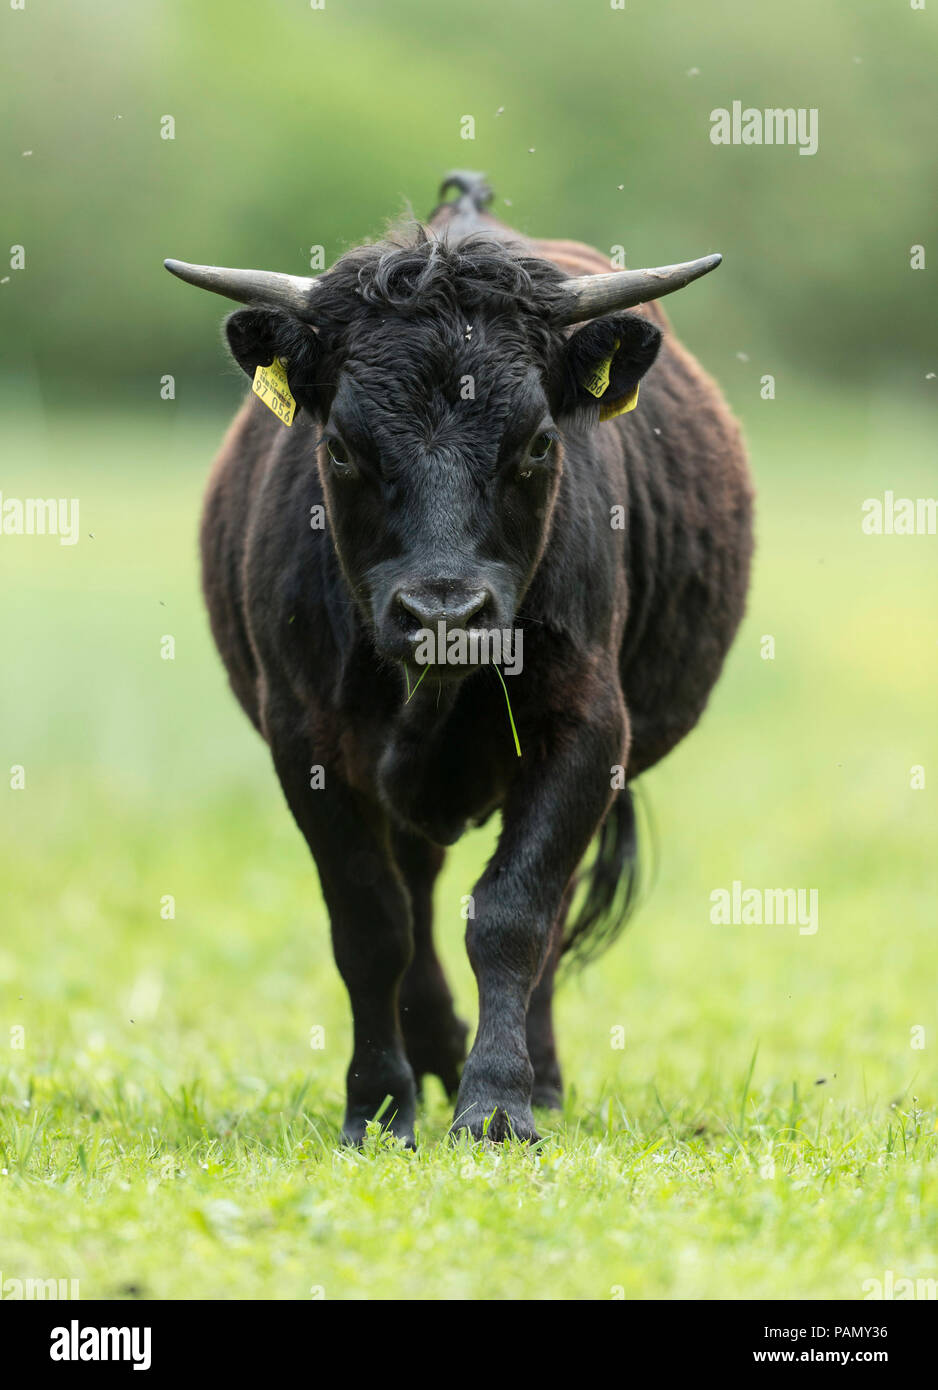 Dexter Cattle. Cow walking towards the camera. Germany Stock Photo